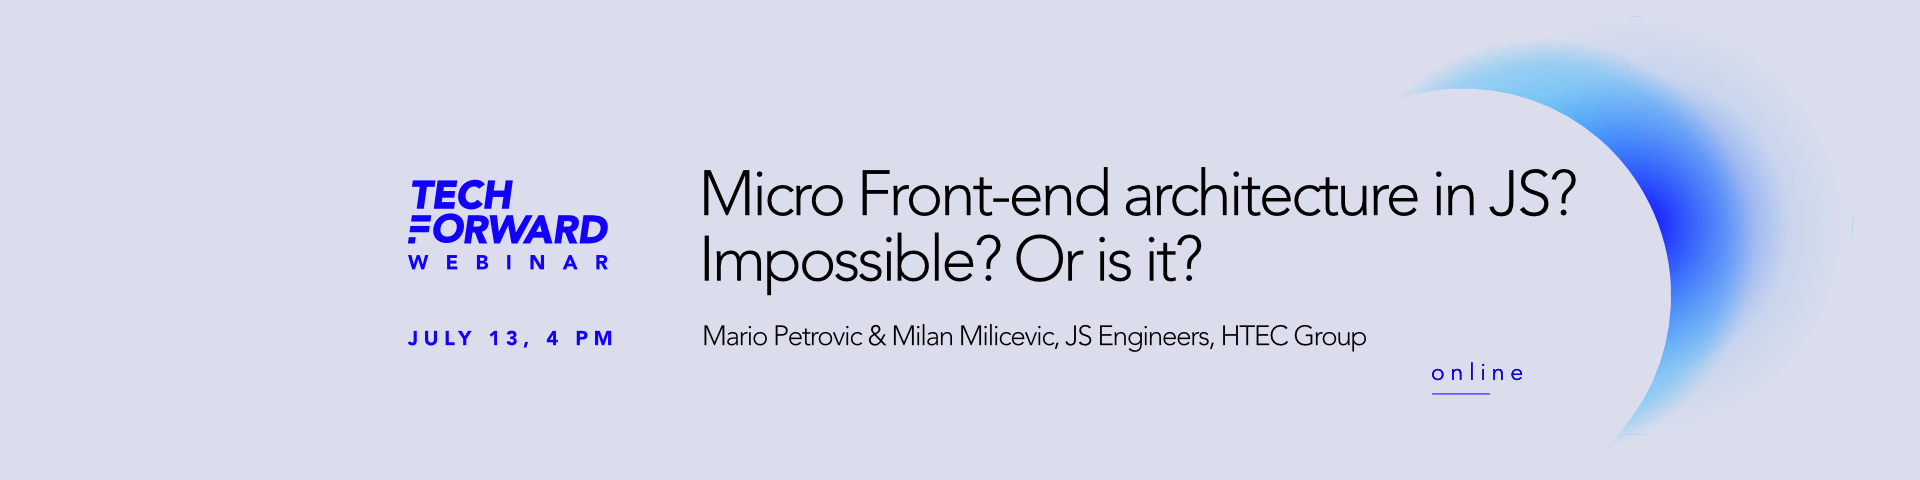 [TechForward Webinar] Micro Front-End Architecture in JS? Impossible? Or is it?